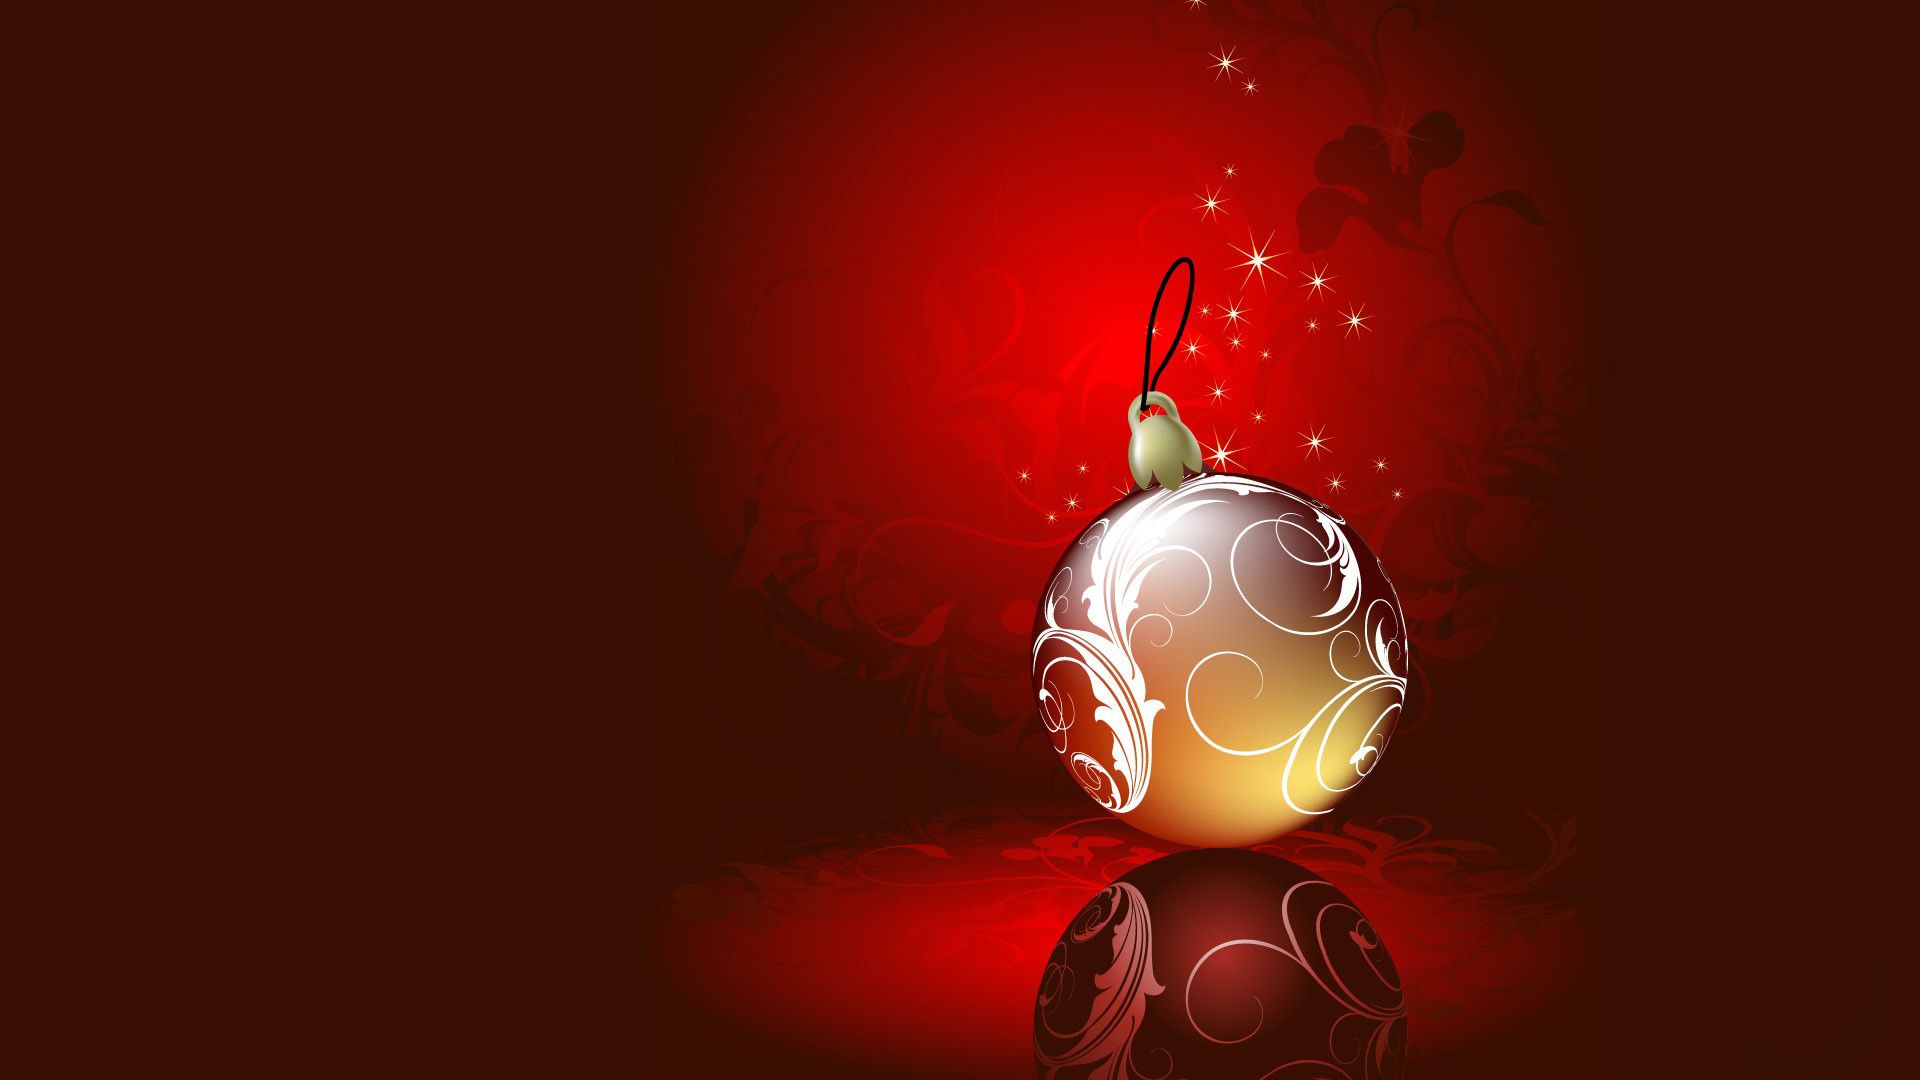 Hd Happy New Year Backgrounds Free ~ Toptenpack.com